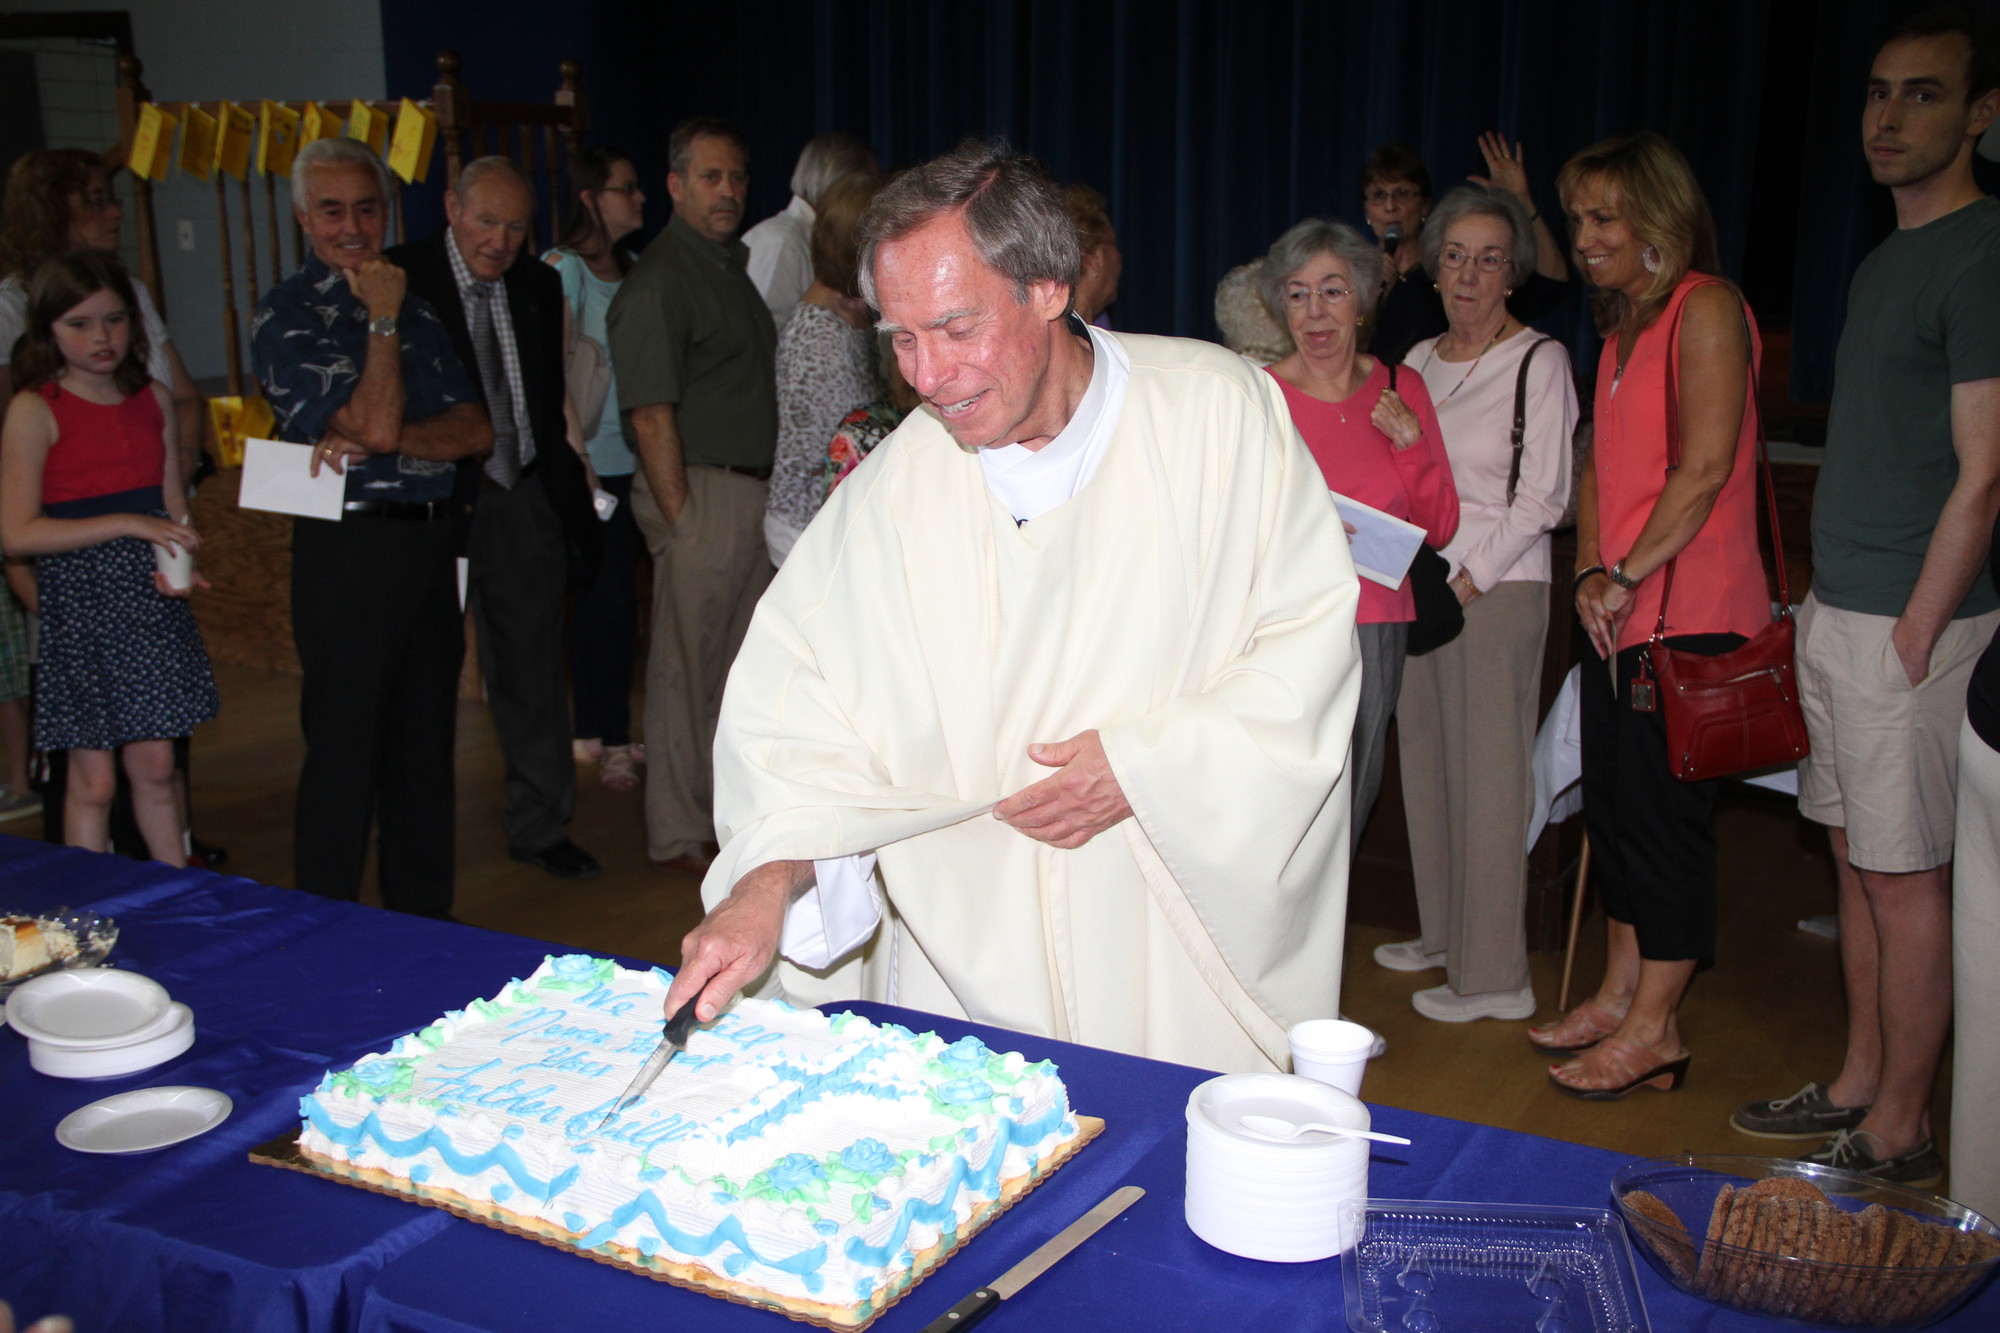 Parishoners hosted a gala in the Our Lady of Peace school to honor Father Bill Breslawski after he celebrated his last Mass at the Lynbrook church.